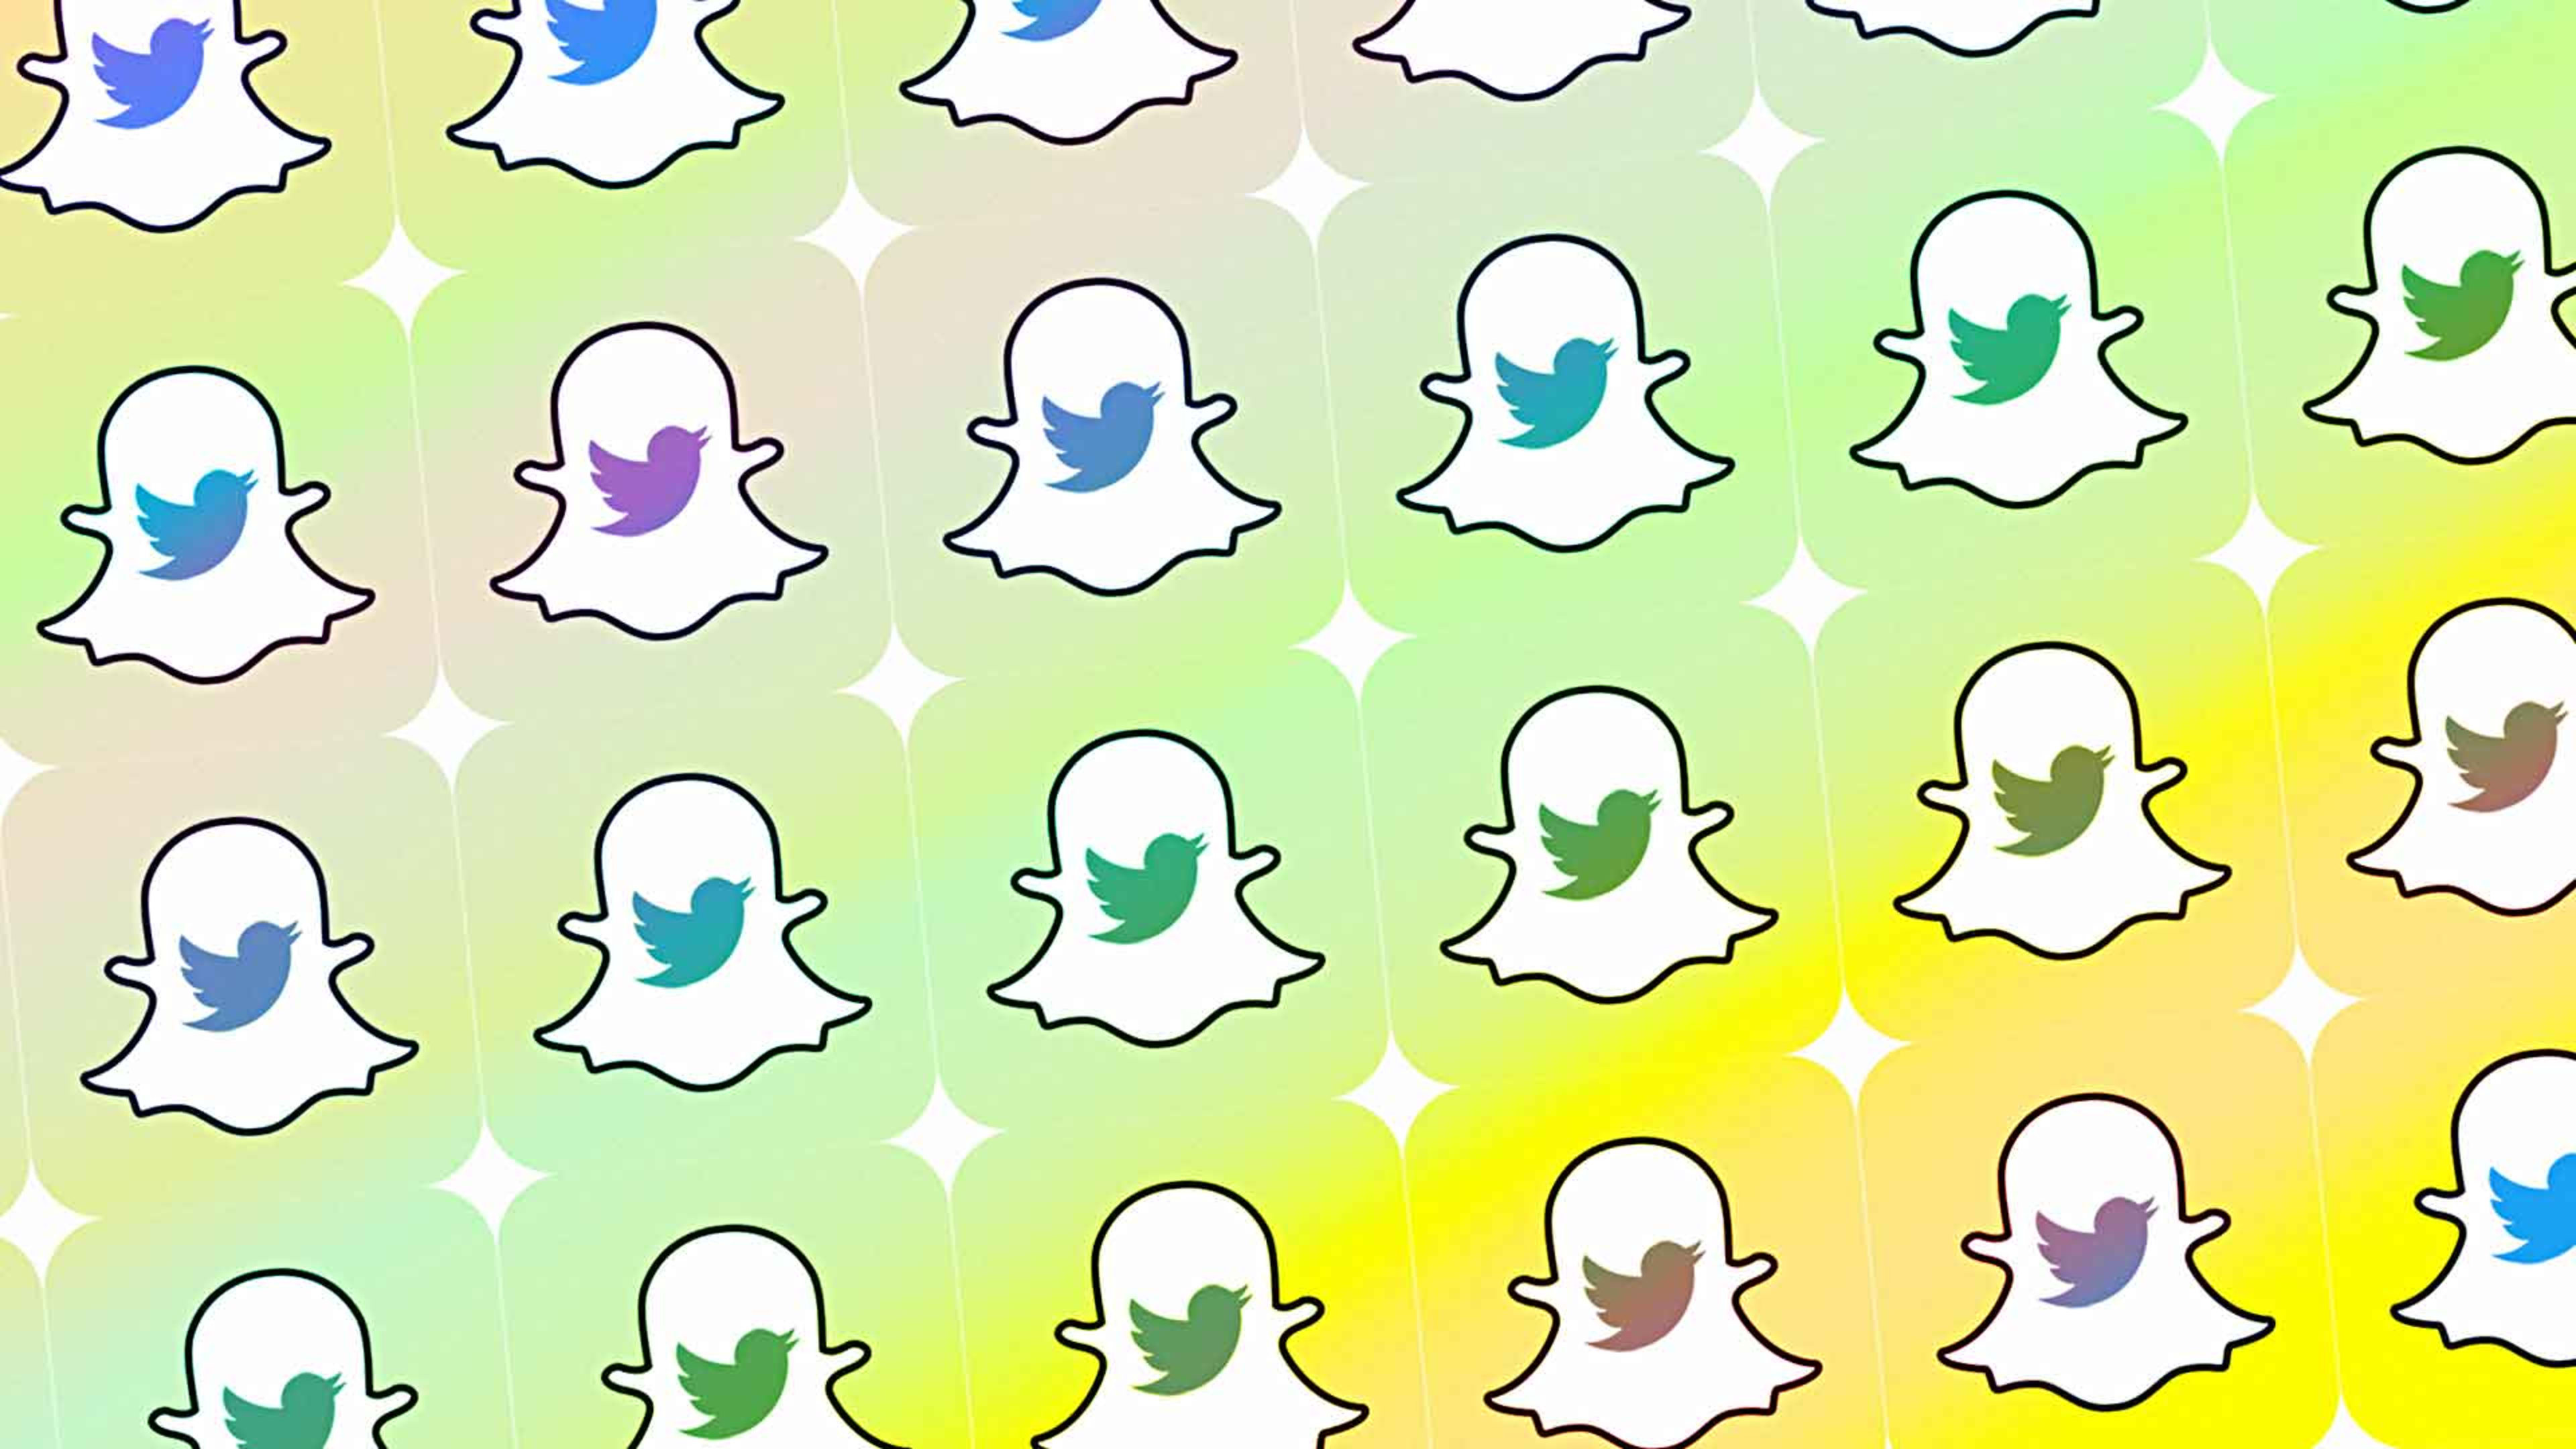 Believe it or not, Snap and Twitter could eat into Facebook’s ad business